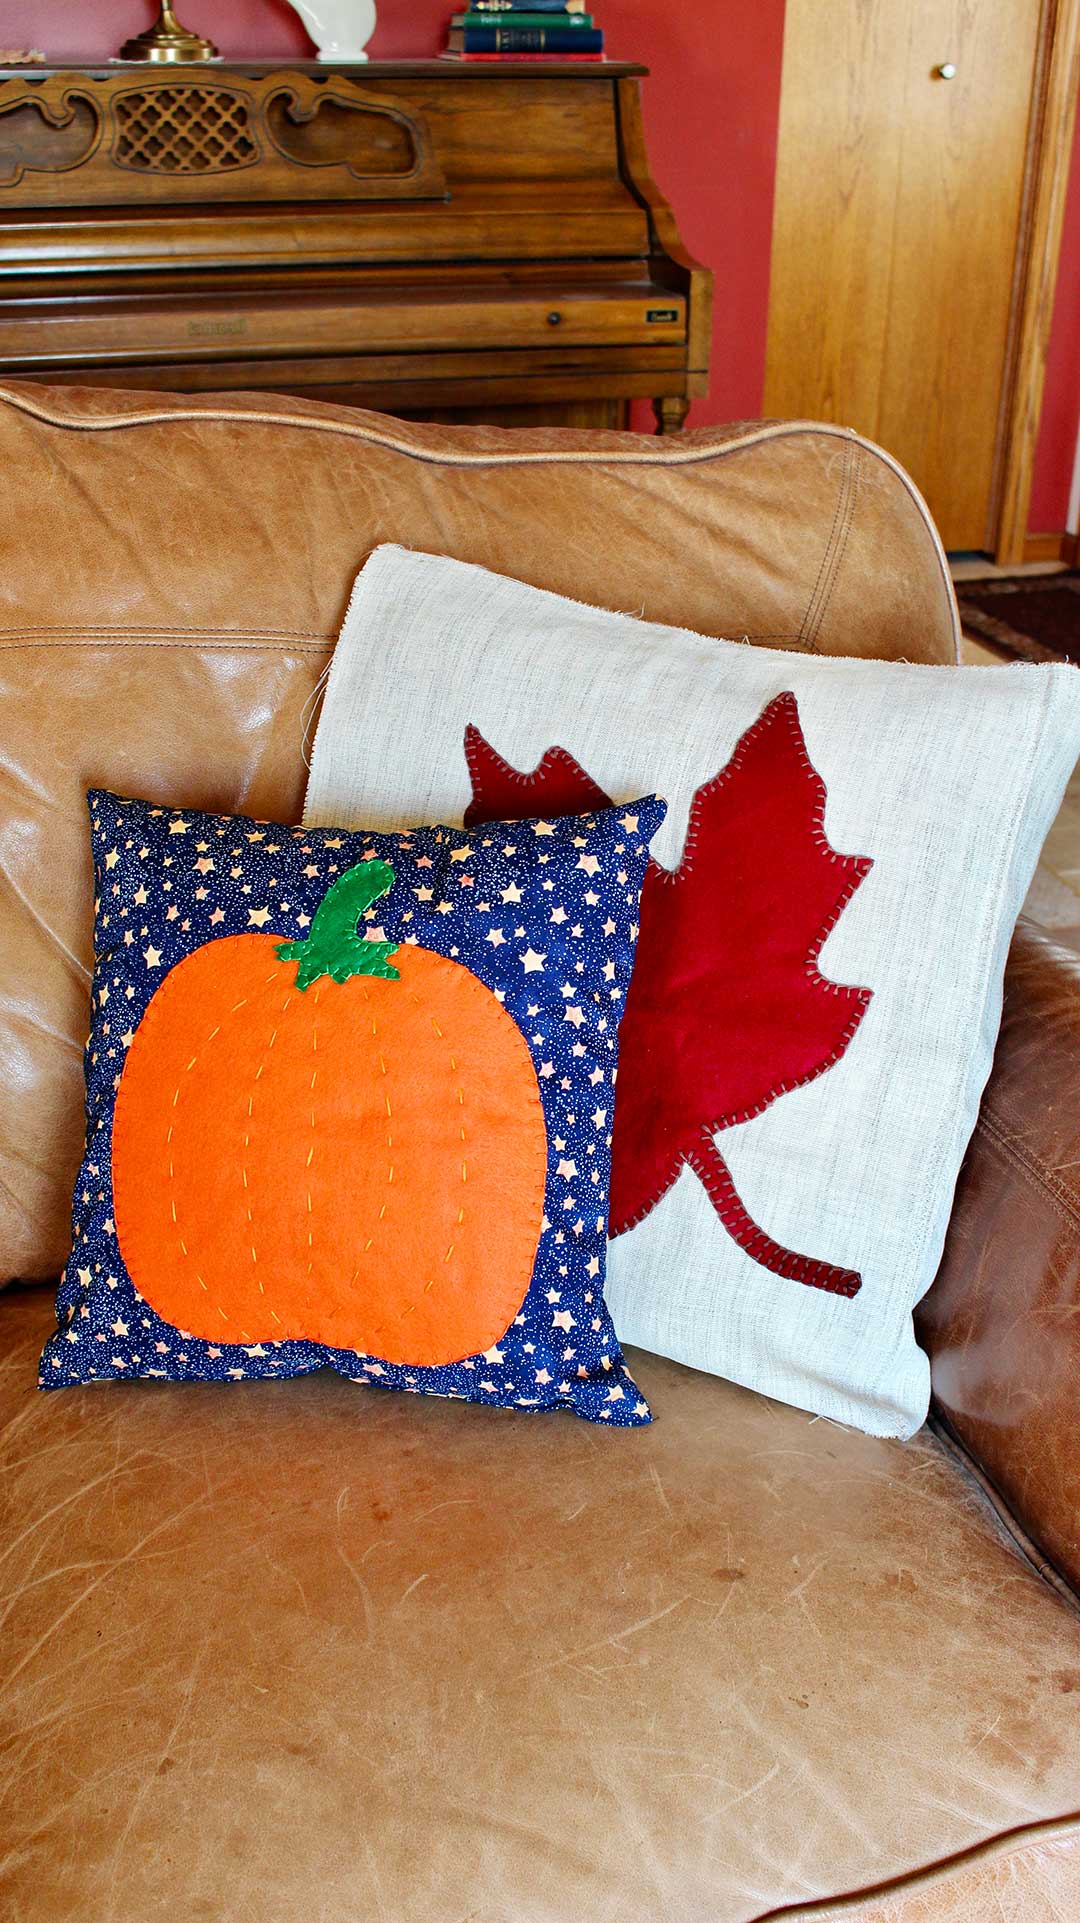 Two completed fall pillows on a tan leather couch.